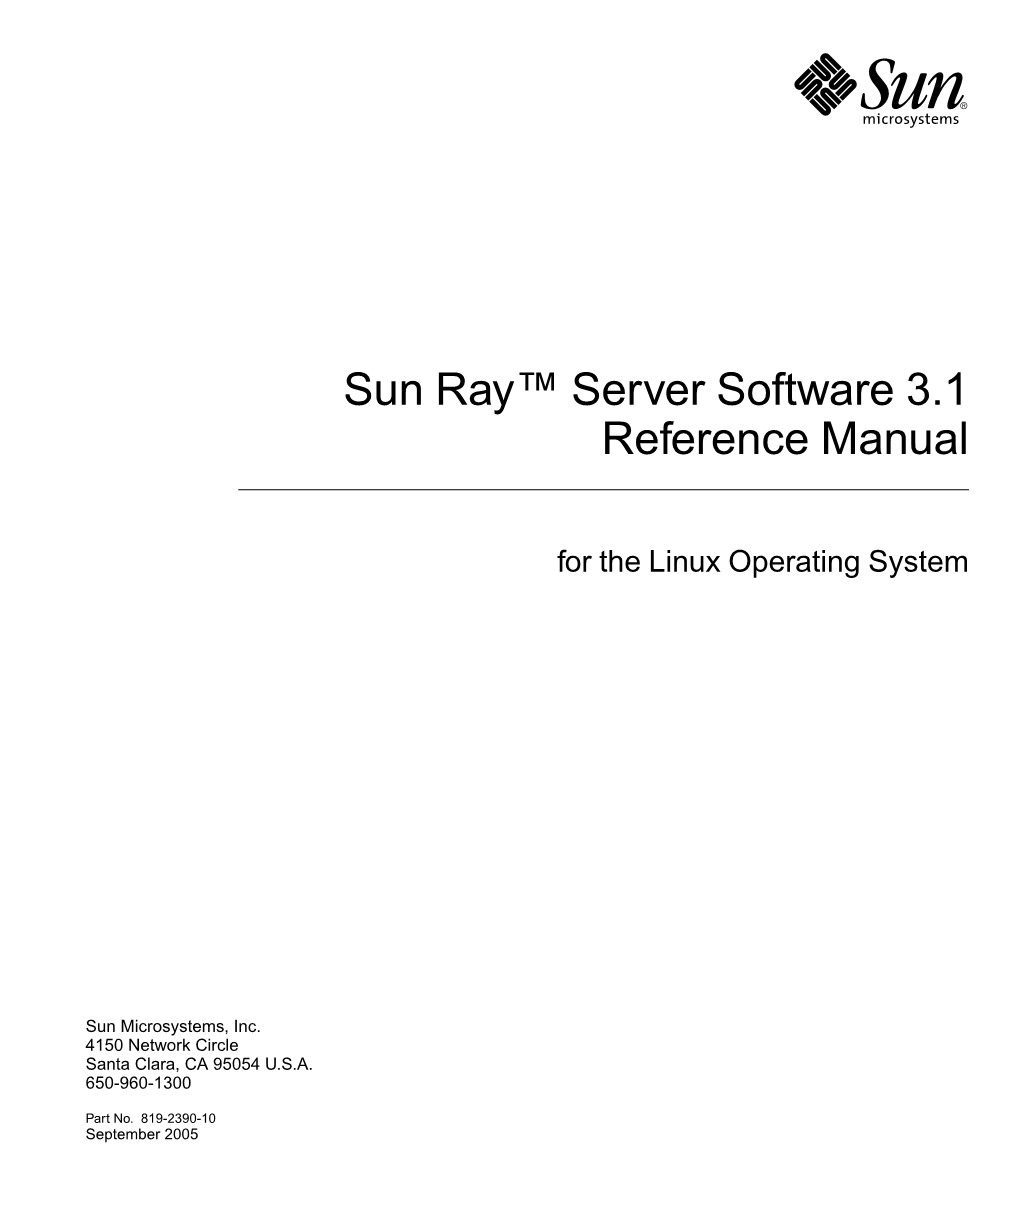 Sun Ray Server Software 3.1 Reference Manual for the Linux